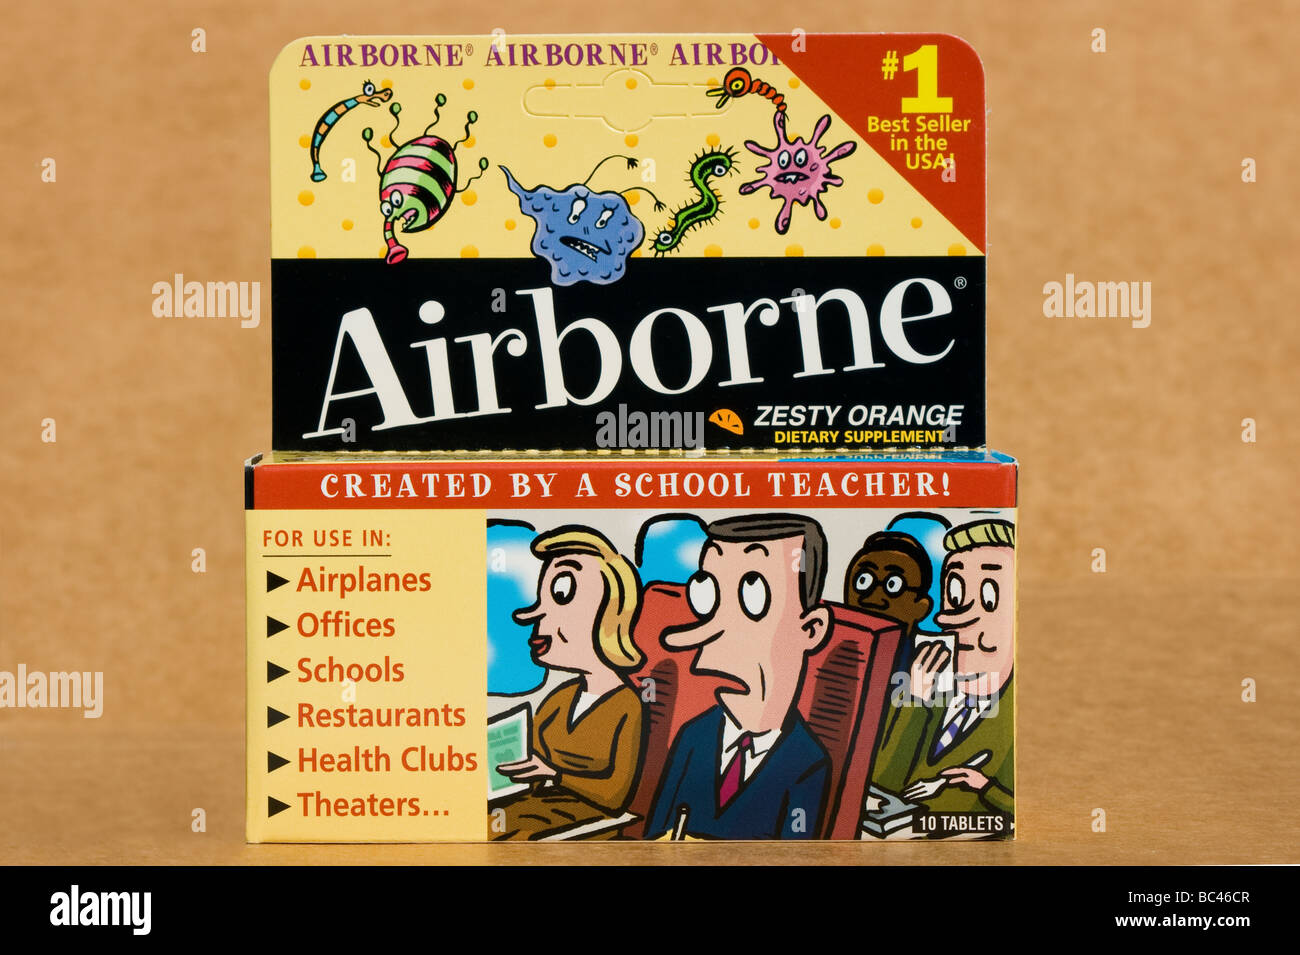 Airborne health formula package which claims to prevent colds and flu.  The FTC decreed that Airborne was falsely advertised. Stock Photo